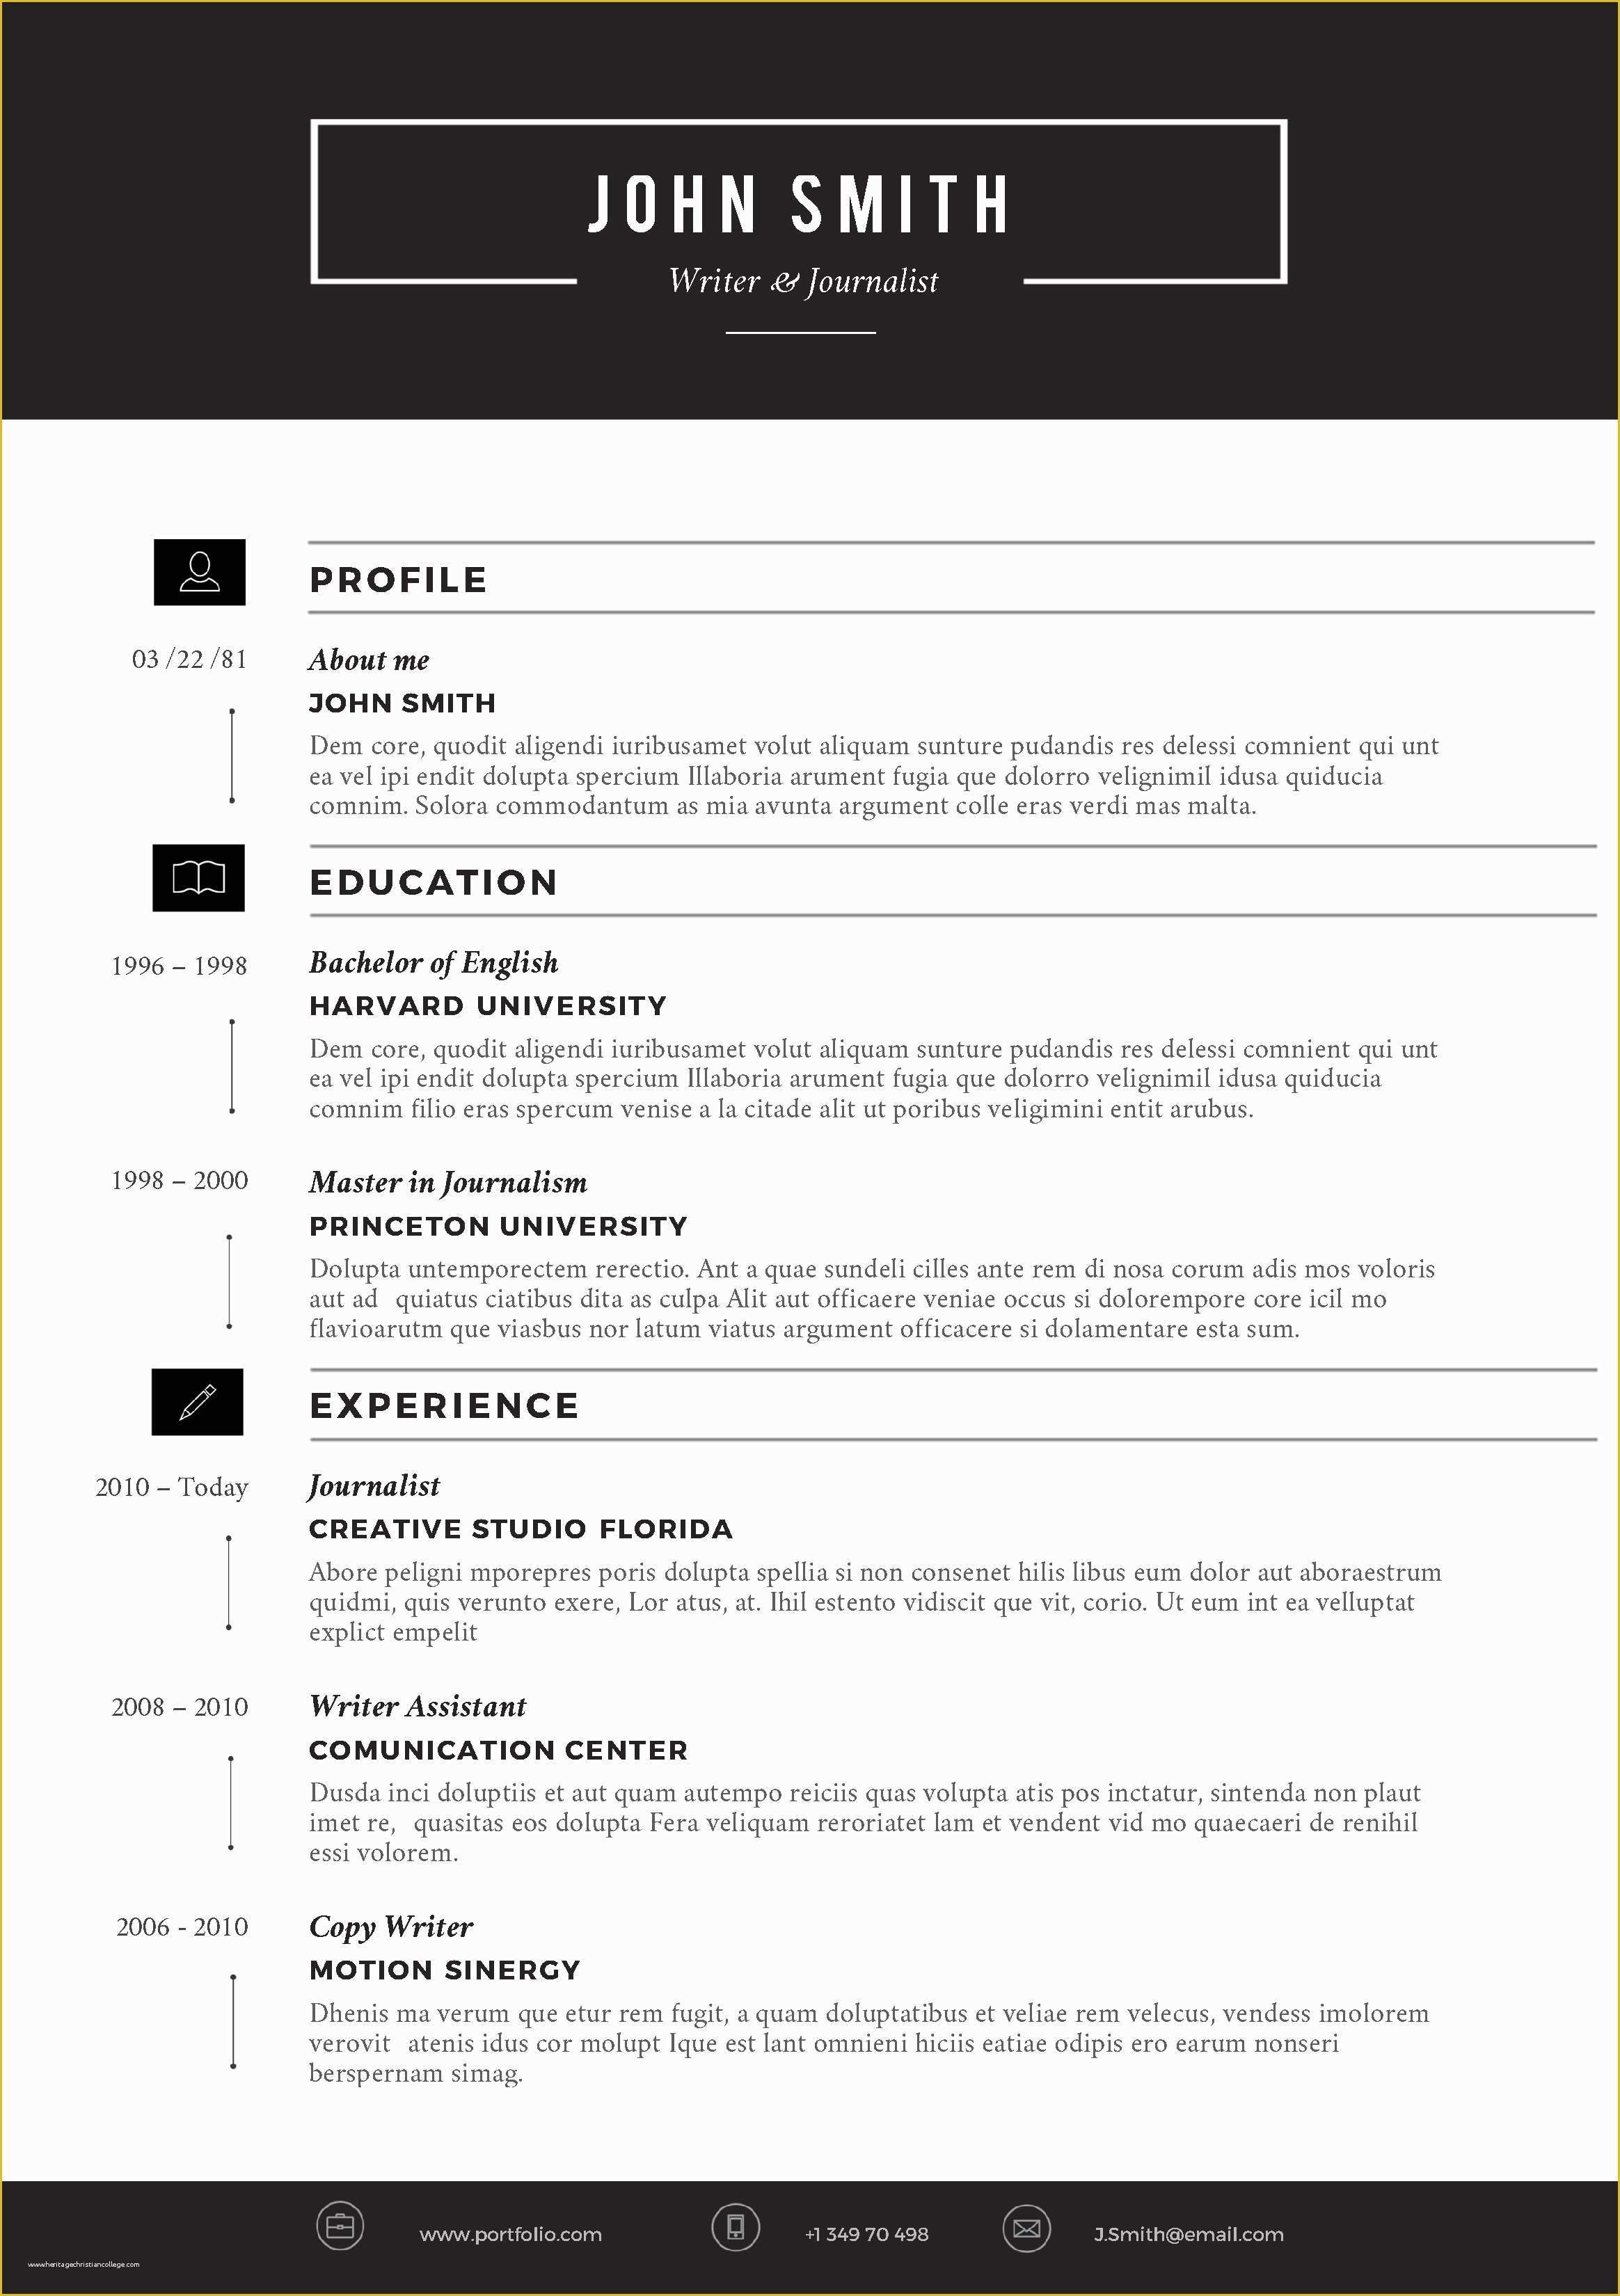 Creative Word Resume Templates Free Of Creative Resume Template by Cvfolio Resumes